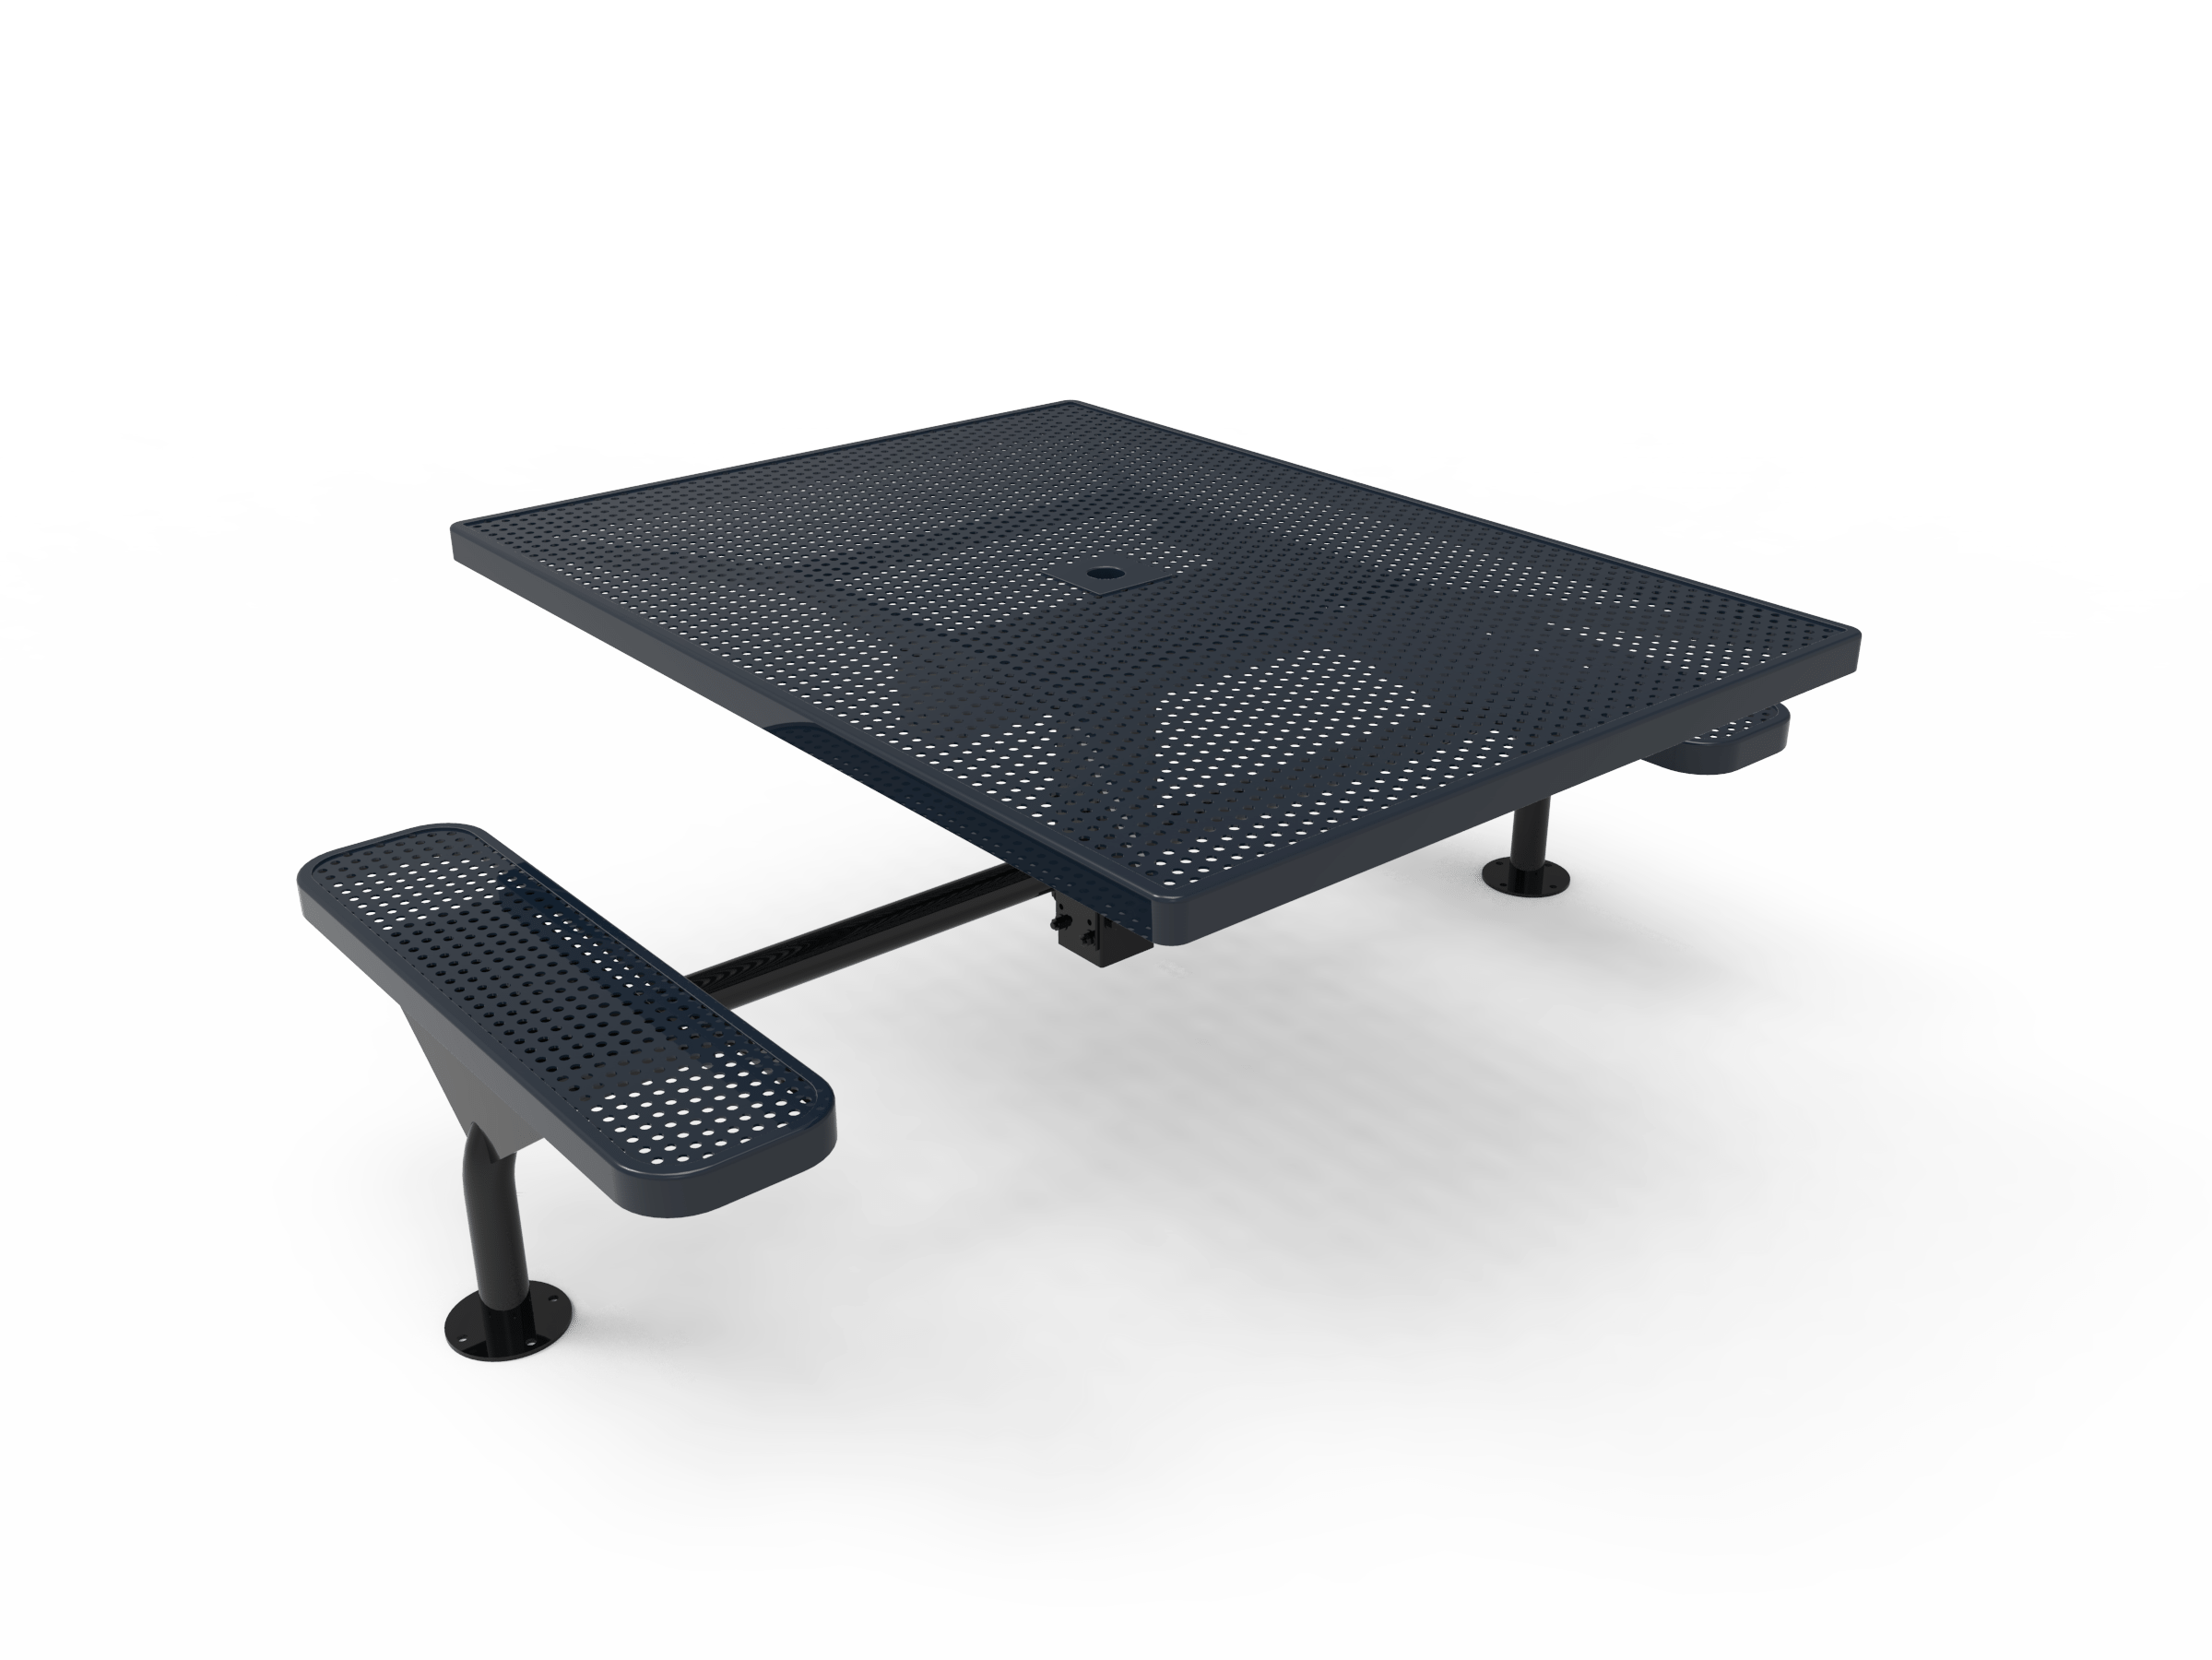 46″ Square Nexus Surface Table With 2 Seats-Punched
TSQ46-D-52-012
Industry Standard Finish
$1519.00
TSQ46-B-52-012
Advantage Premium Finish
$1889.00
